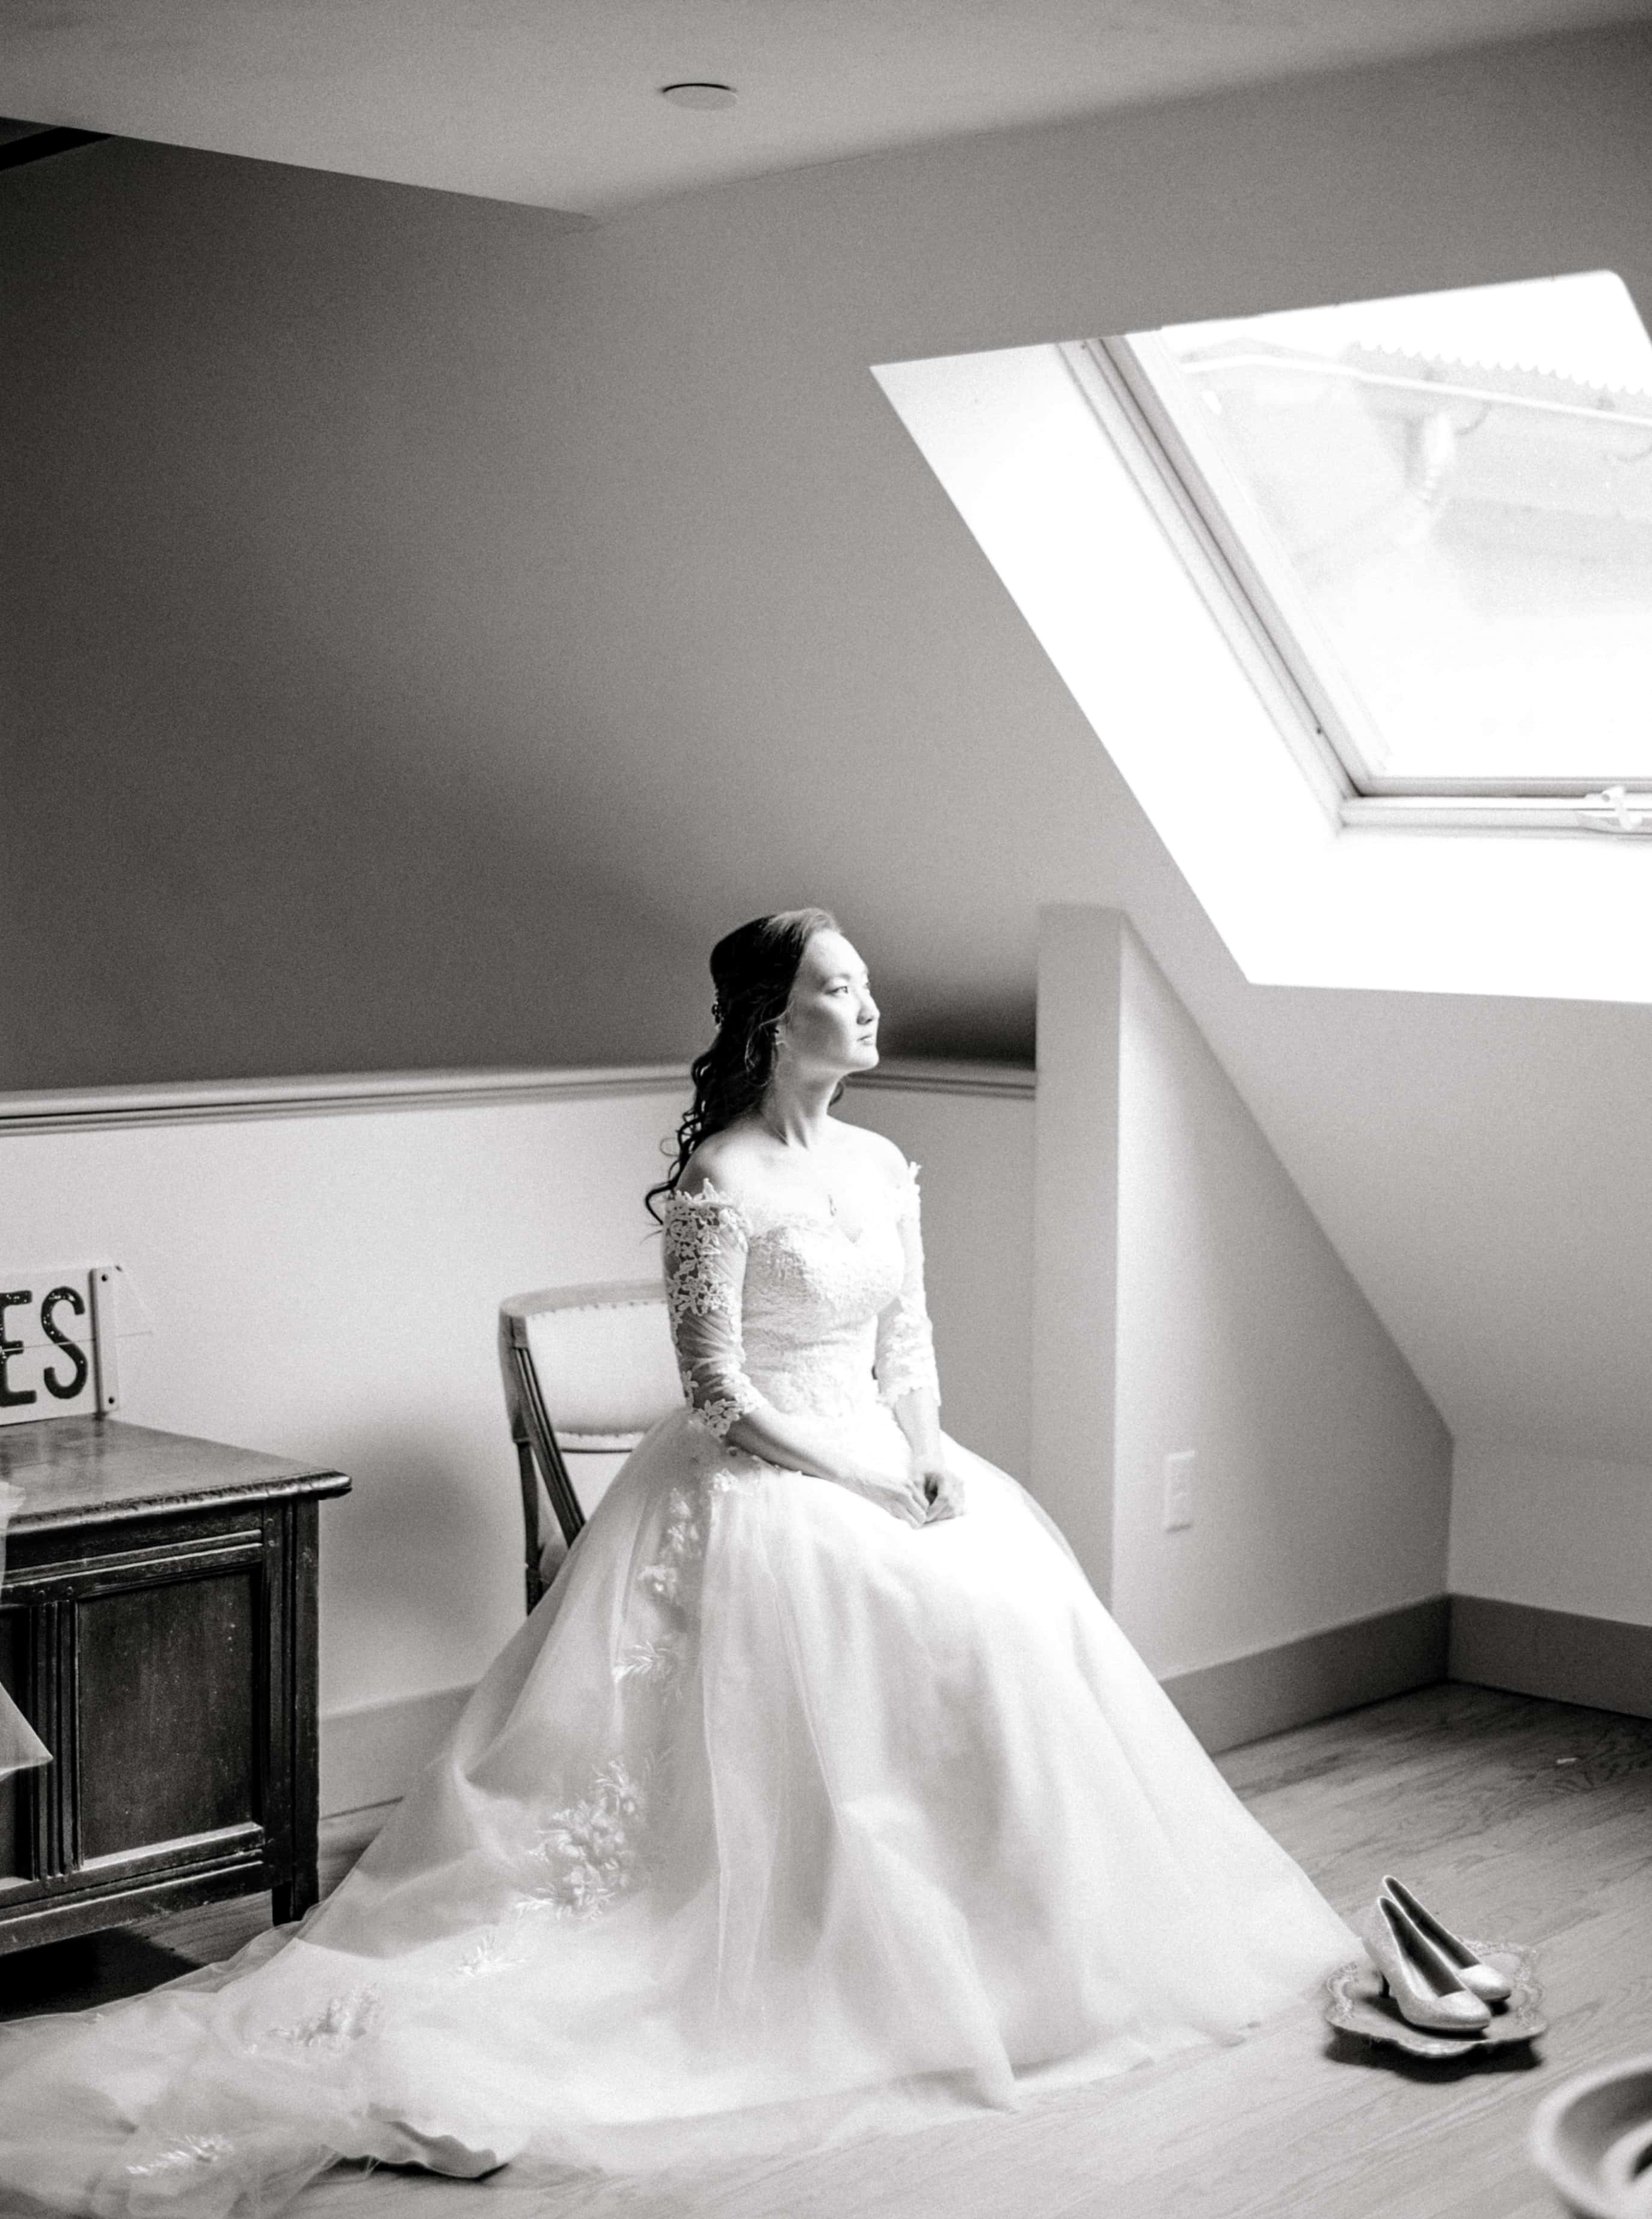 A bride is sitting in front of a large window feeling peaceful and stress-free before her wedding ceremony begins, photographed by North Shore, Massachusetts wedding photographer Marcela Plosker